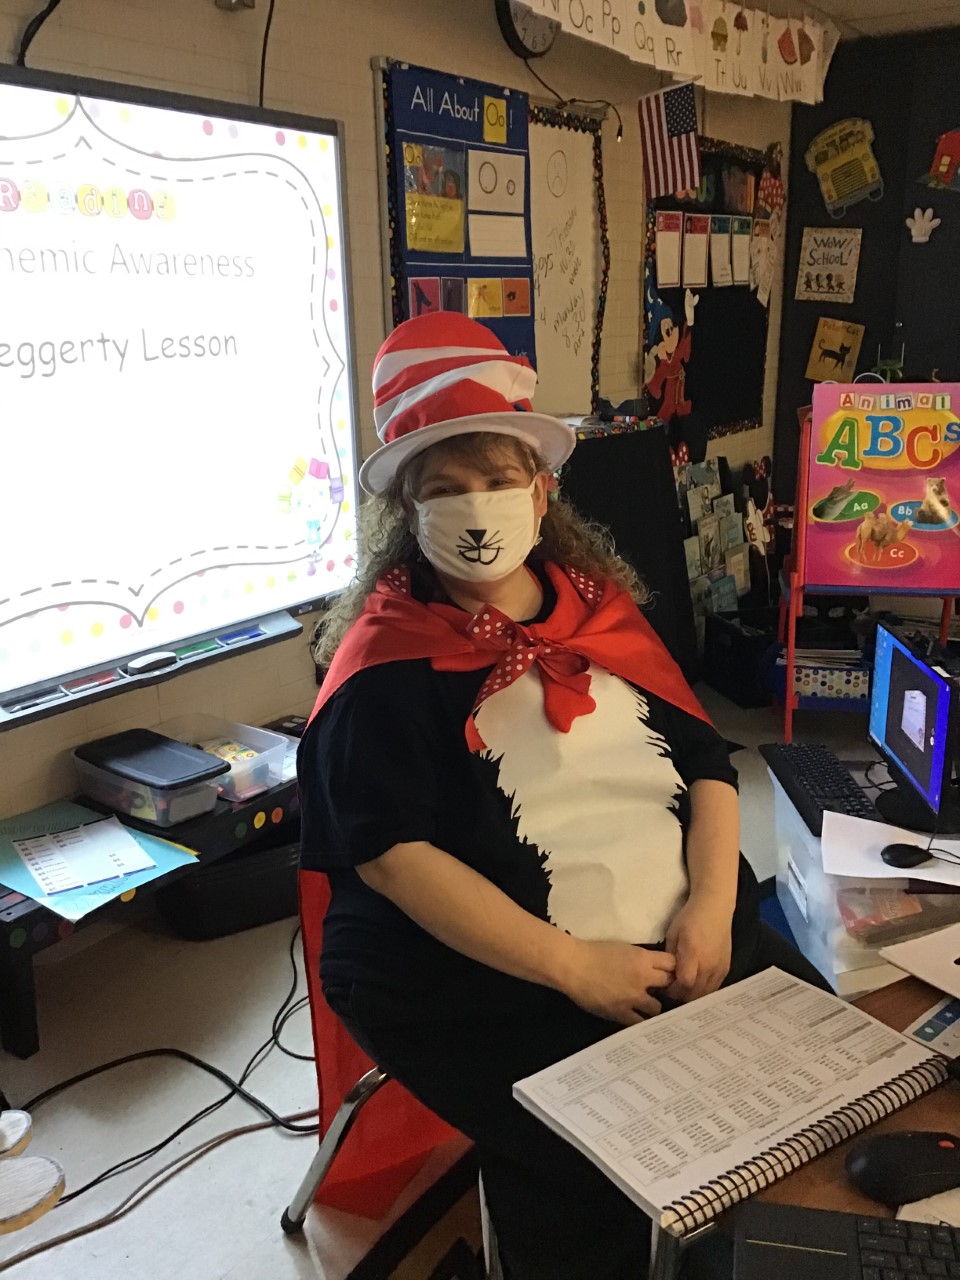 Teacher dress as The Cat in the Hat